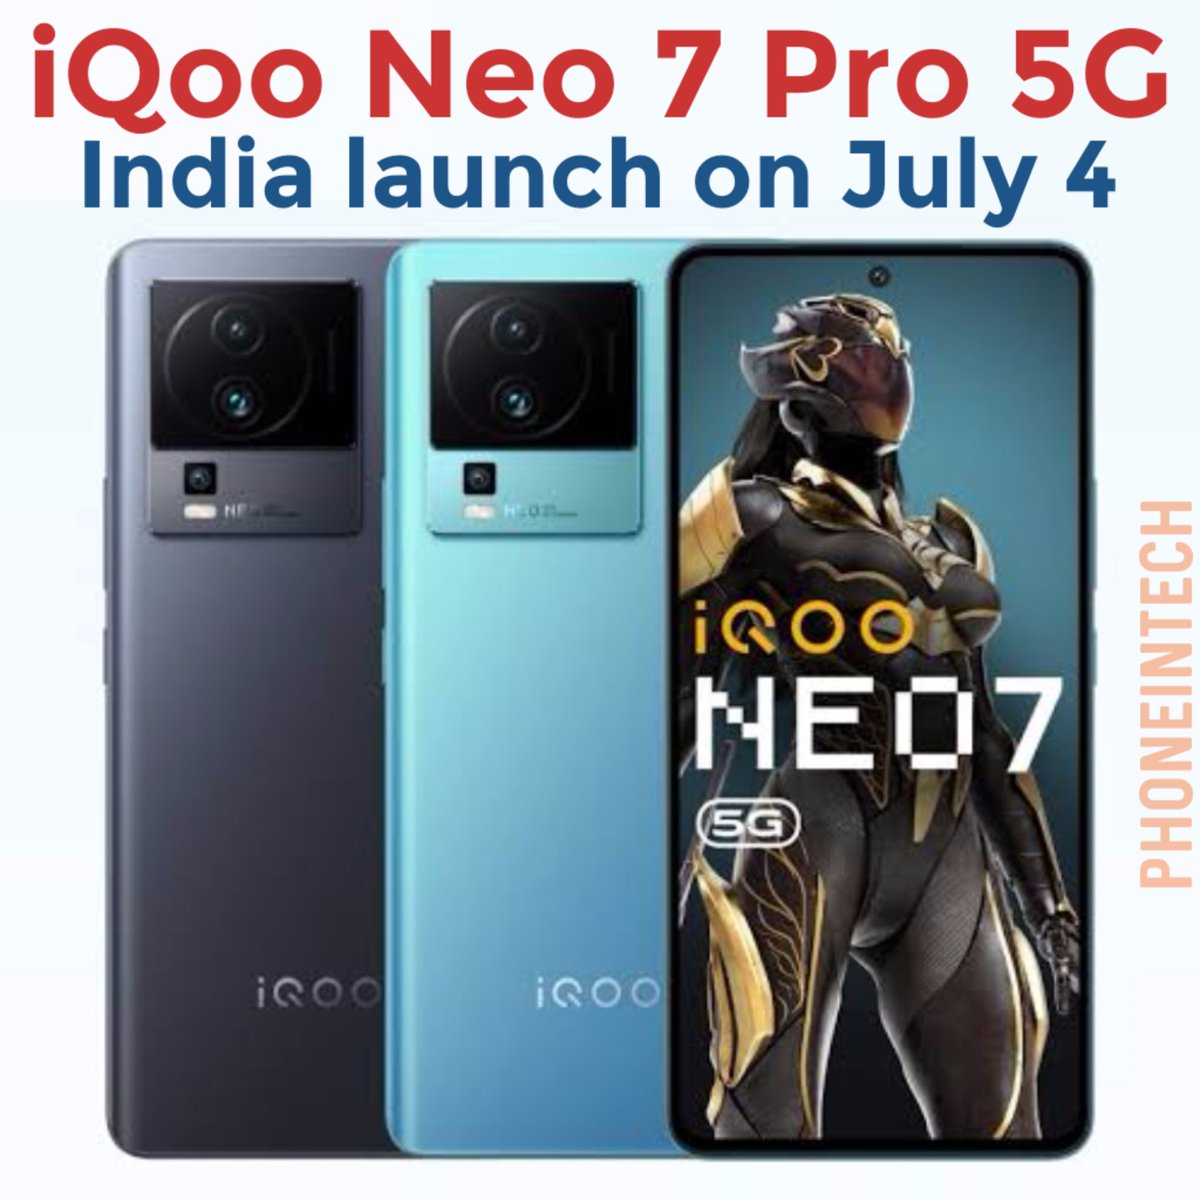 iQoo Neo 7 Pro 5G confirmed to launch in India on July 4. It features a 50mp primary camera sensor with a 6.78 inch 1.5K OLED display. It also offers 120W fast charging and runs on Snapdragon 8+ Gen 1 SoC. 

#iqooneo75g #iqoo #iqoosmartphones #technews #technewsindia